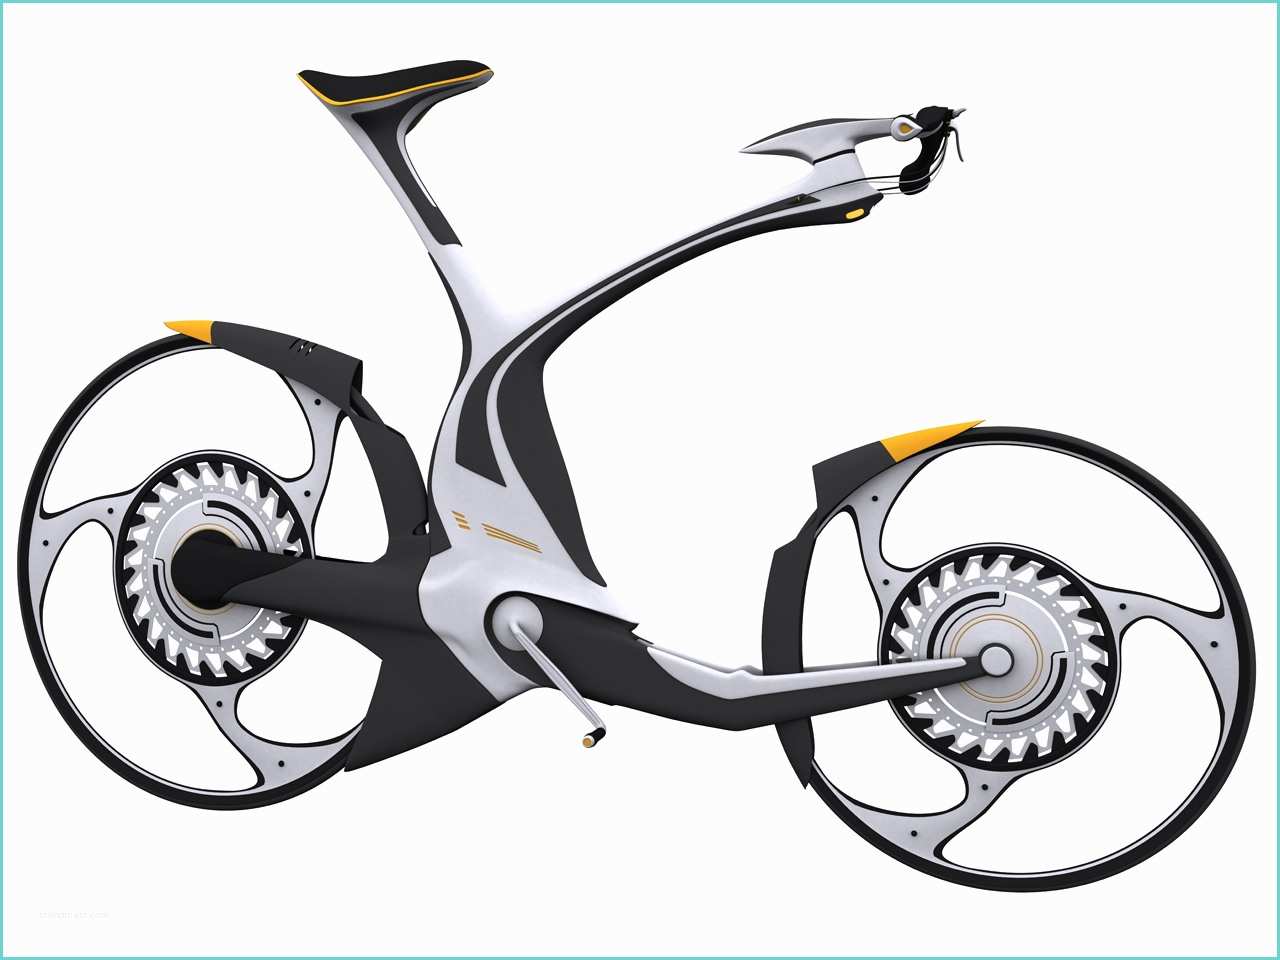 Best Radium Designs for Bikes 25 Futuristic Bicycles that Will Make You Go Wow